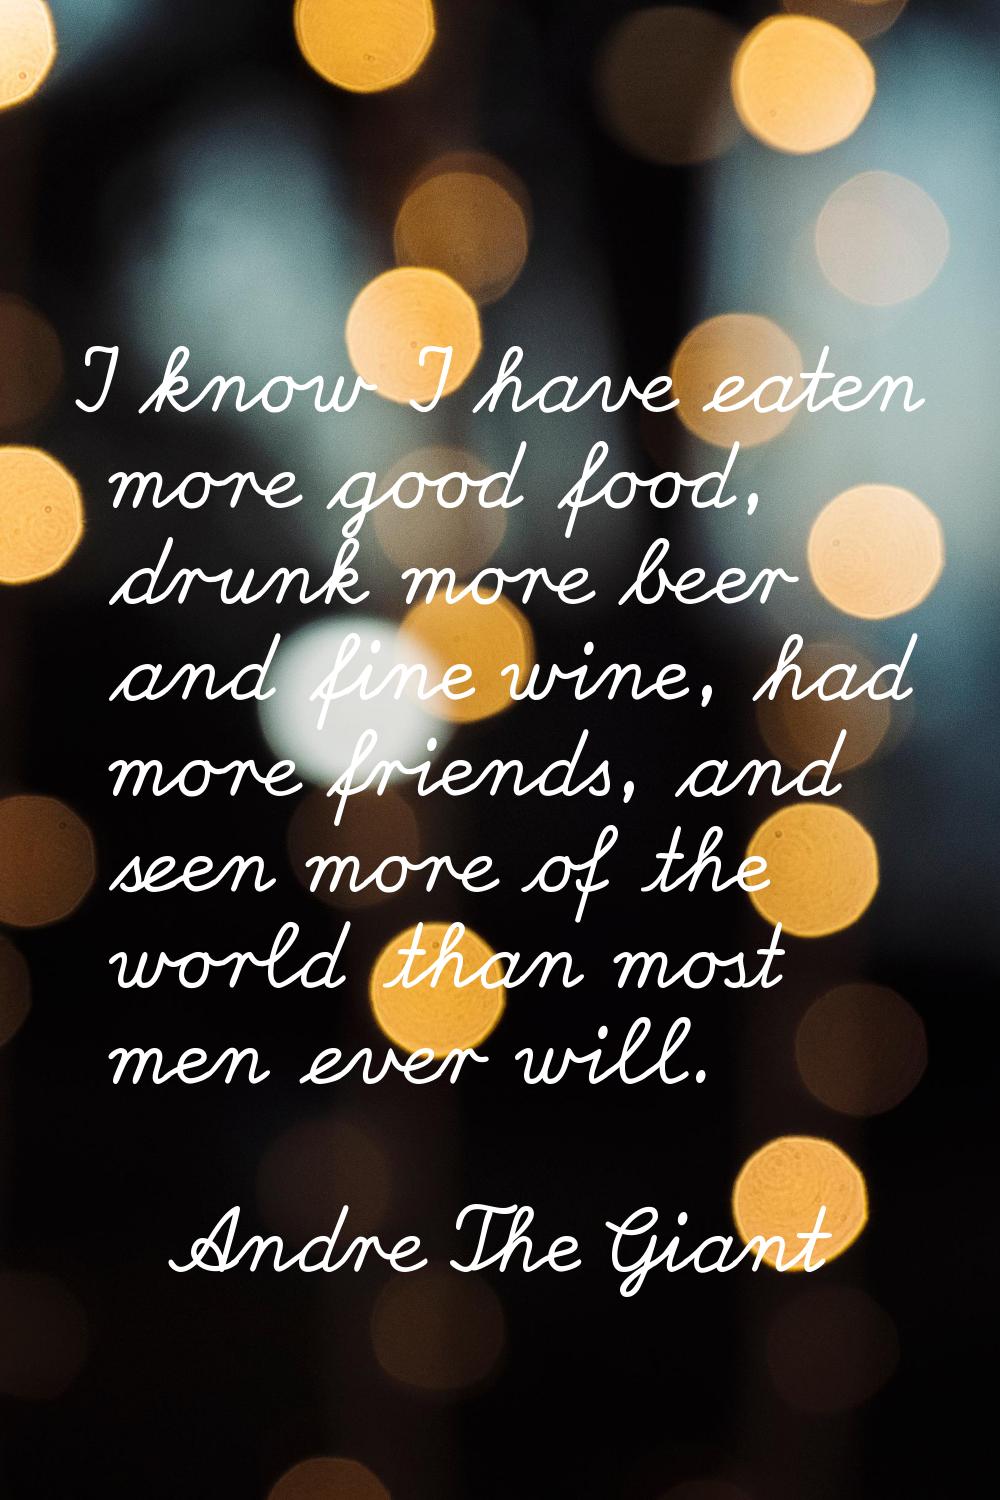 I know I have eaten more good food, drunk more beer and fine wine, had more friends, and seen more 